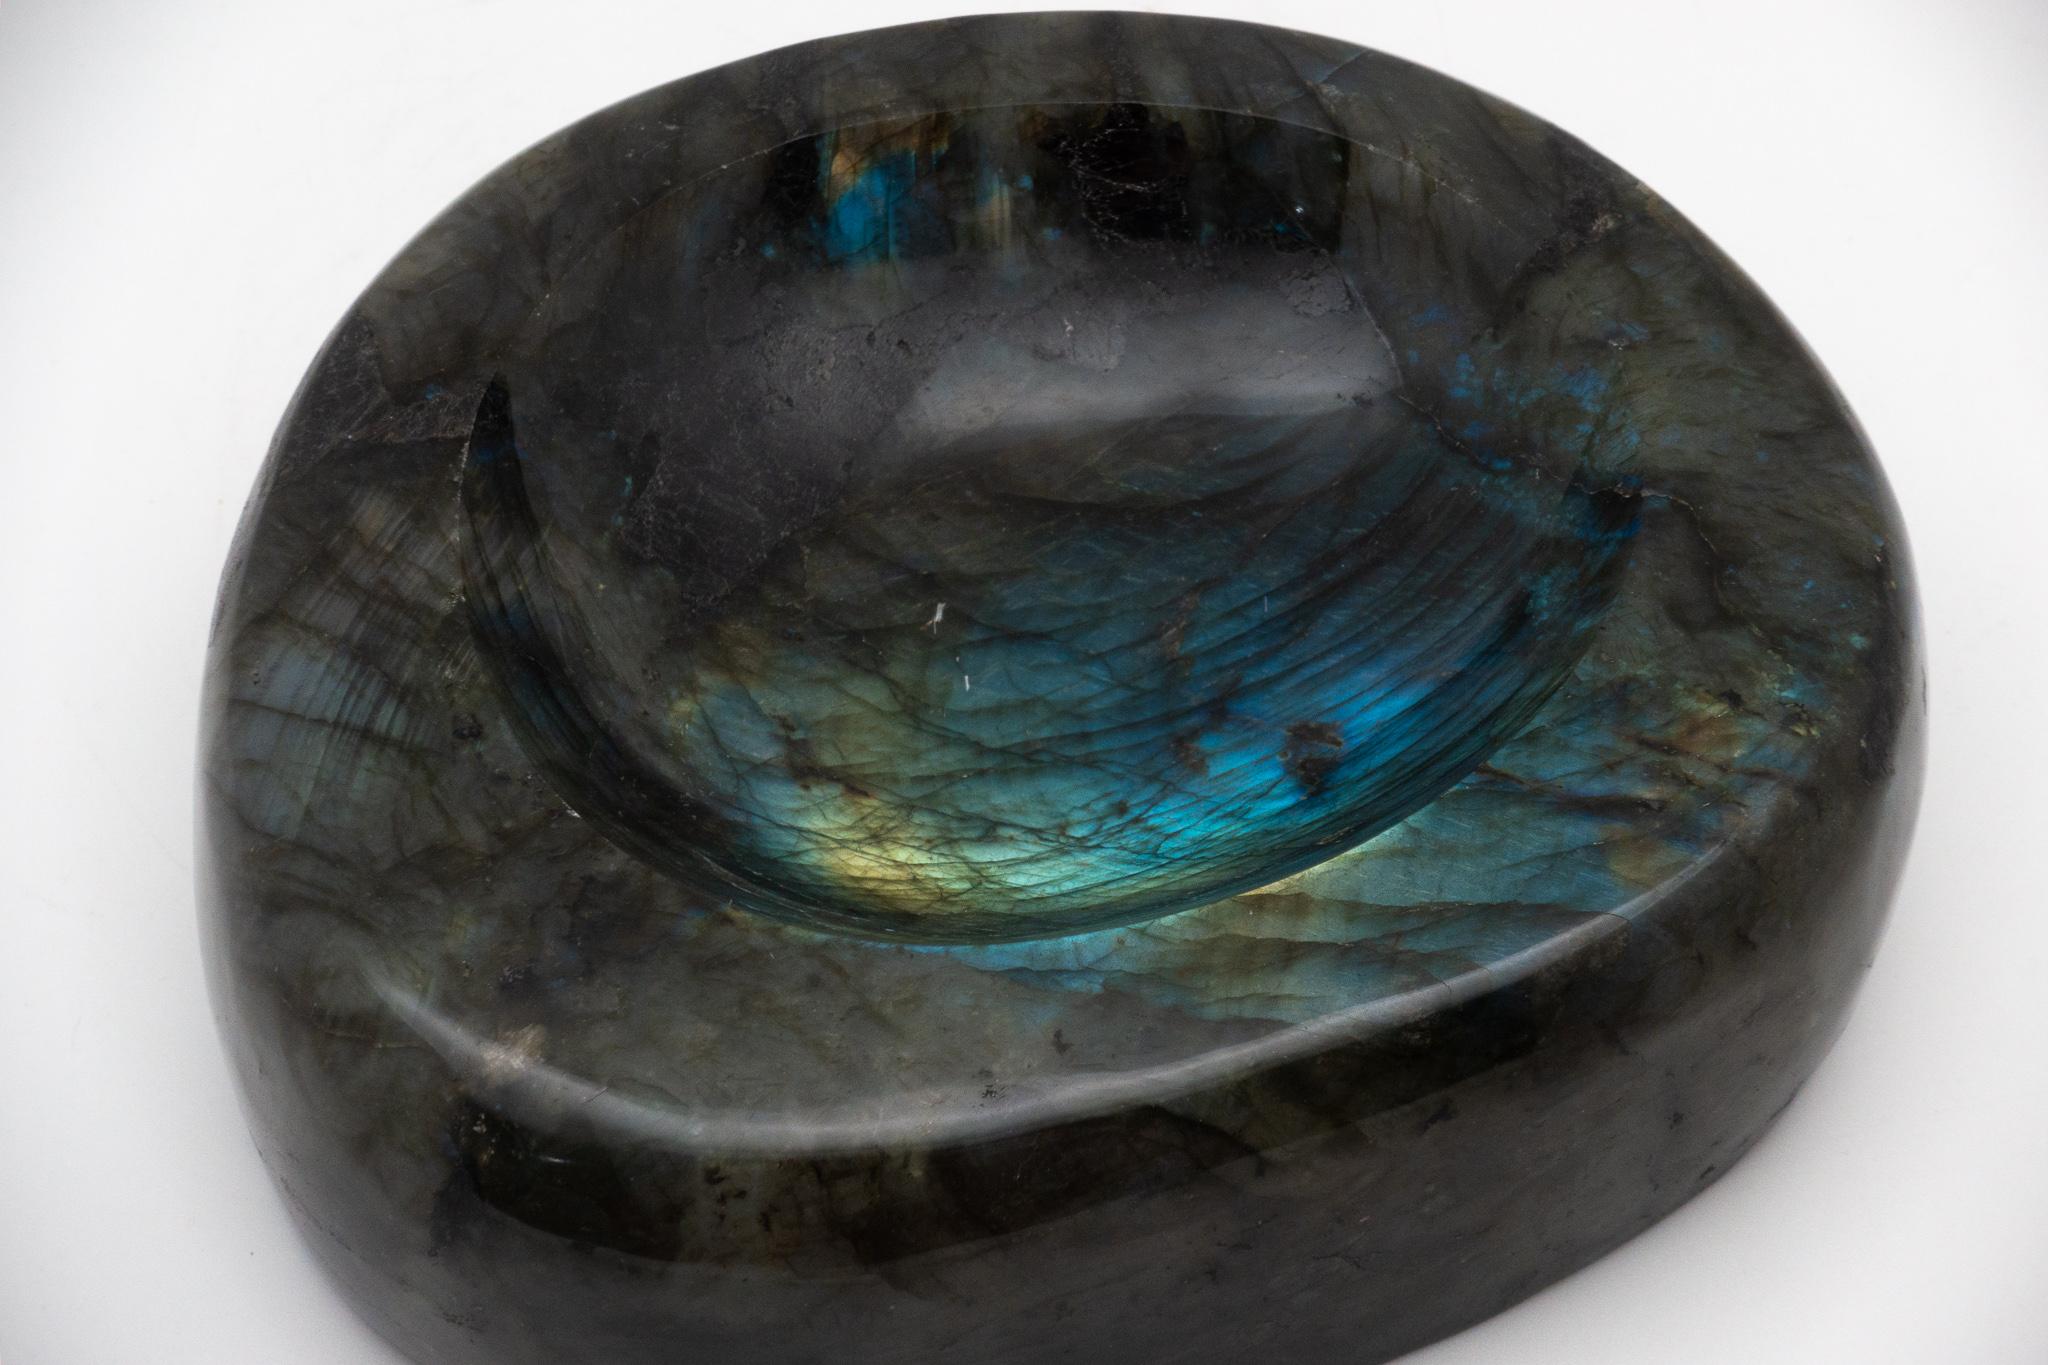 Malagasy Labradorite Vide Poche Bowl, Rare and Large in Size, Hand-Carved in Madagascar